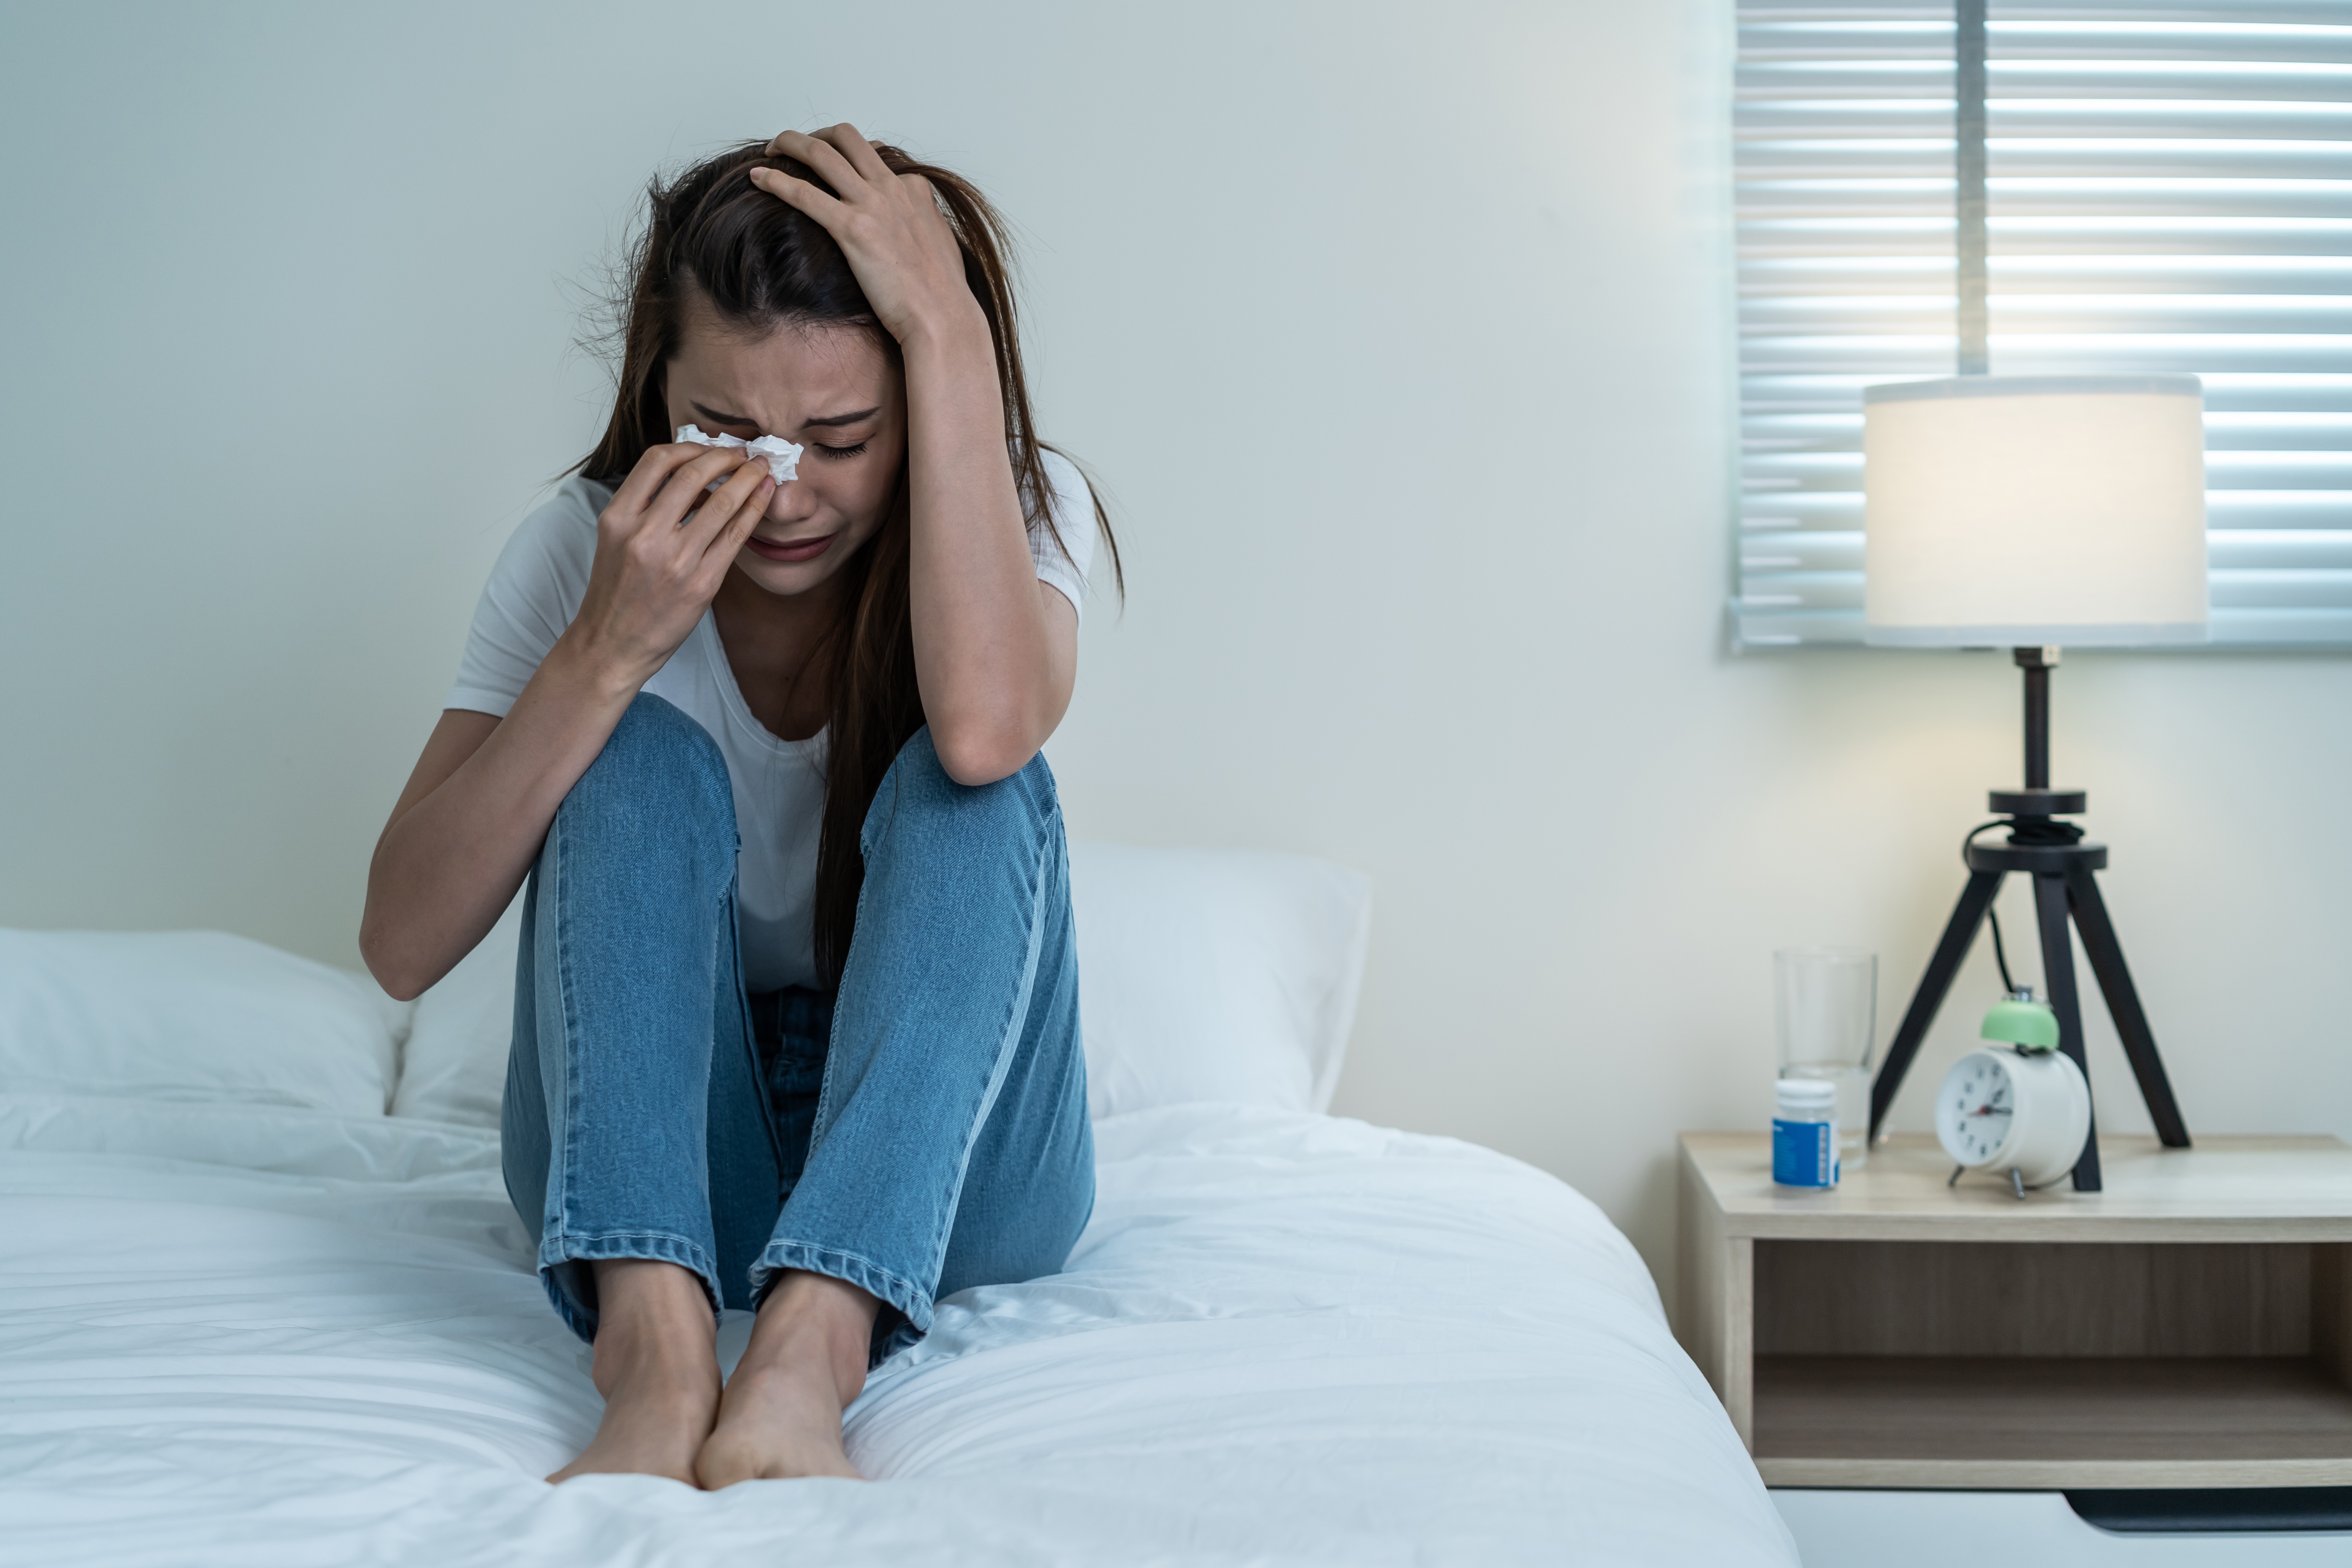 A woman crying on a bed | Source: Shutterstock